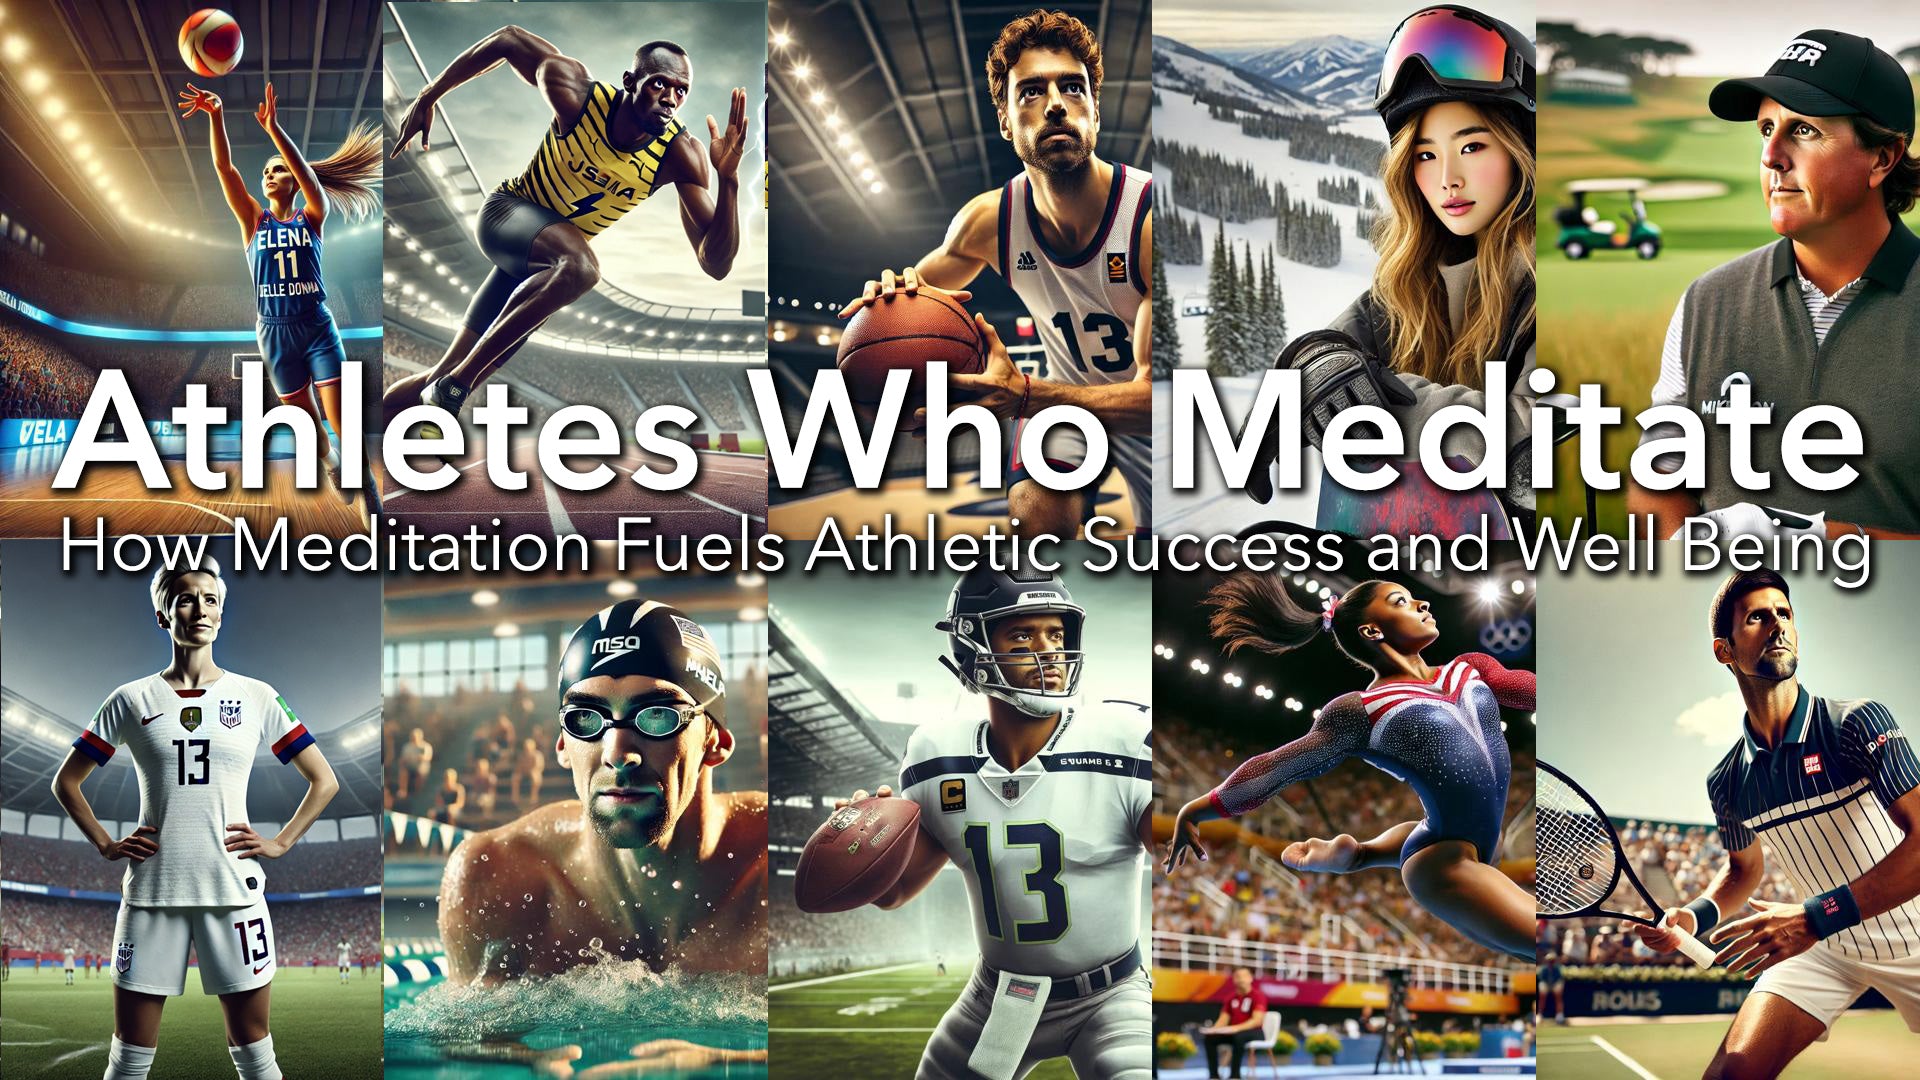 Athletes Who Meditate: How Meditation Fuels Athletic Success and Well Being